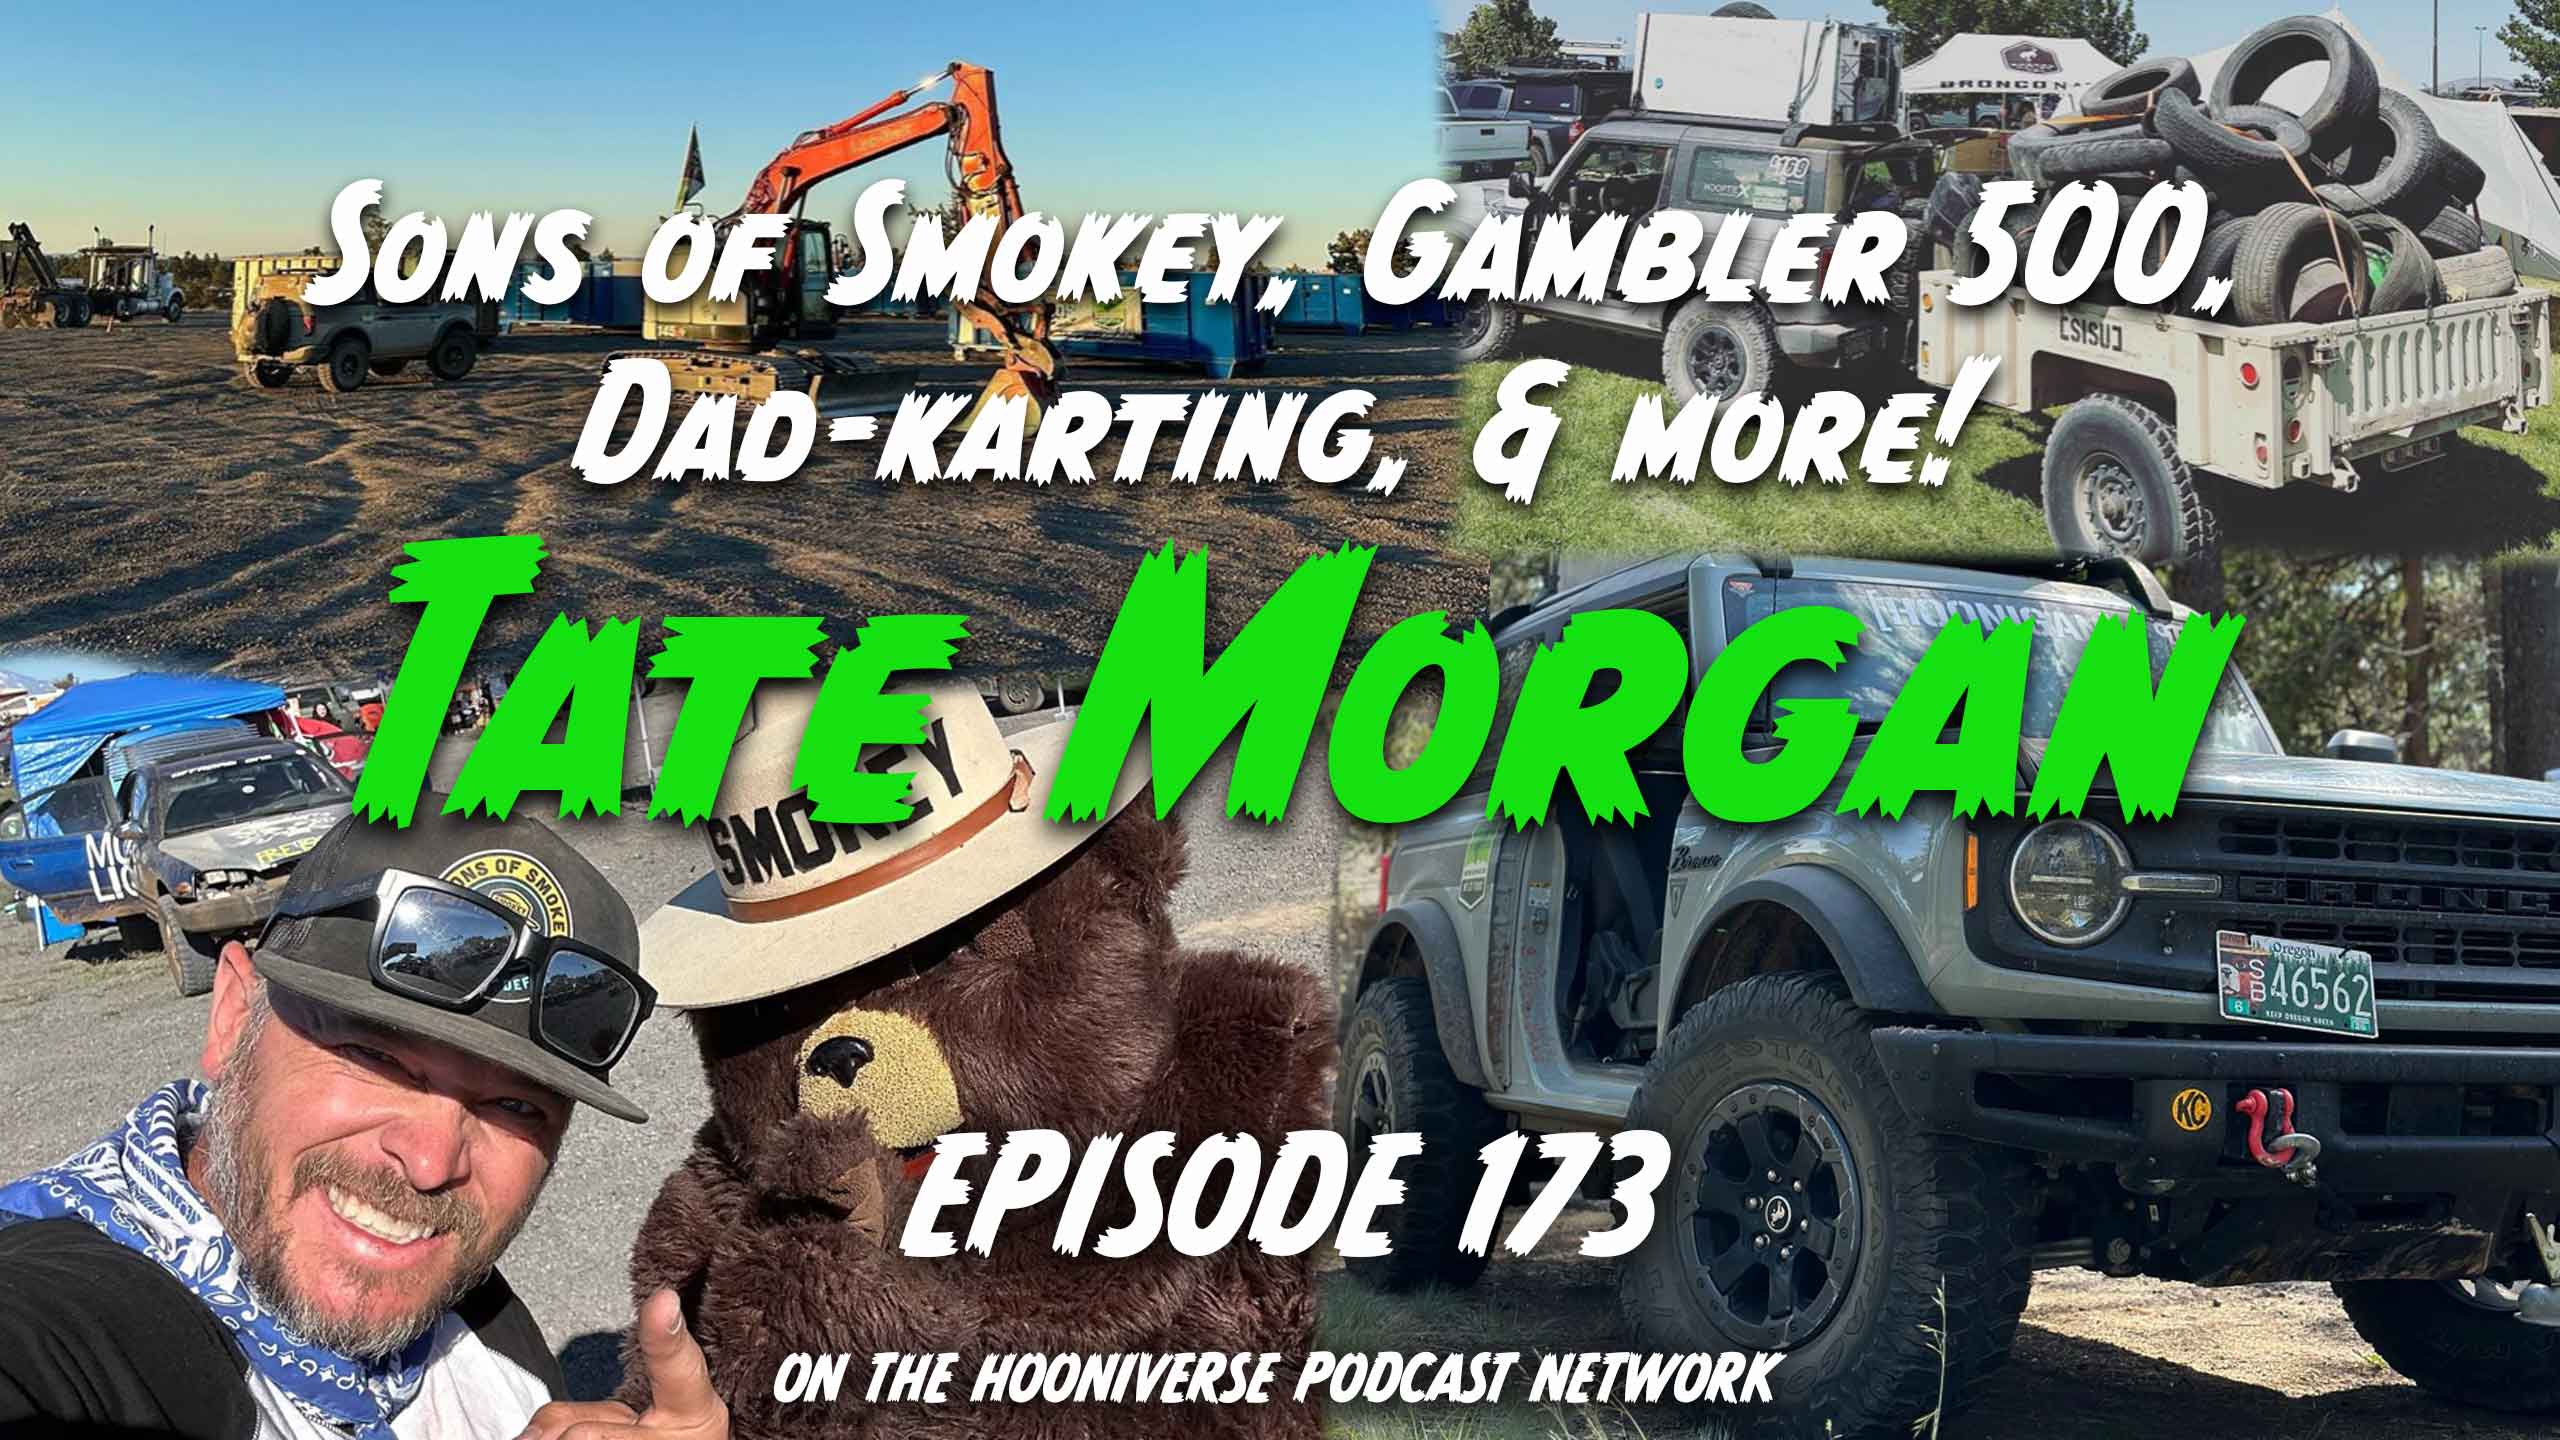 Tate-Morgan-Sons-of-Smokey-Gambler-500-Off-The-Road-Again-Podcast-Episode-173